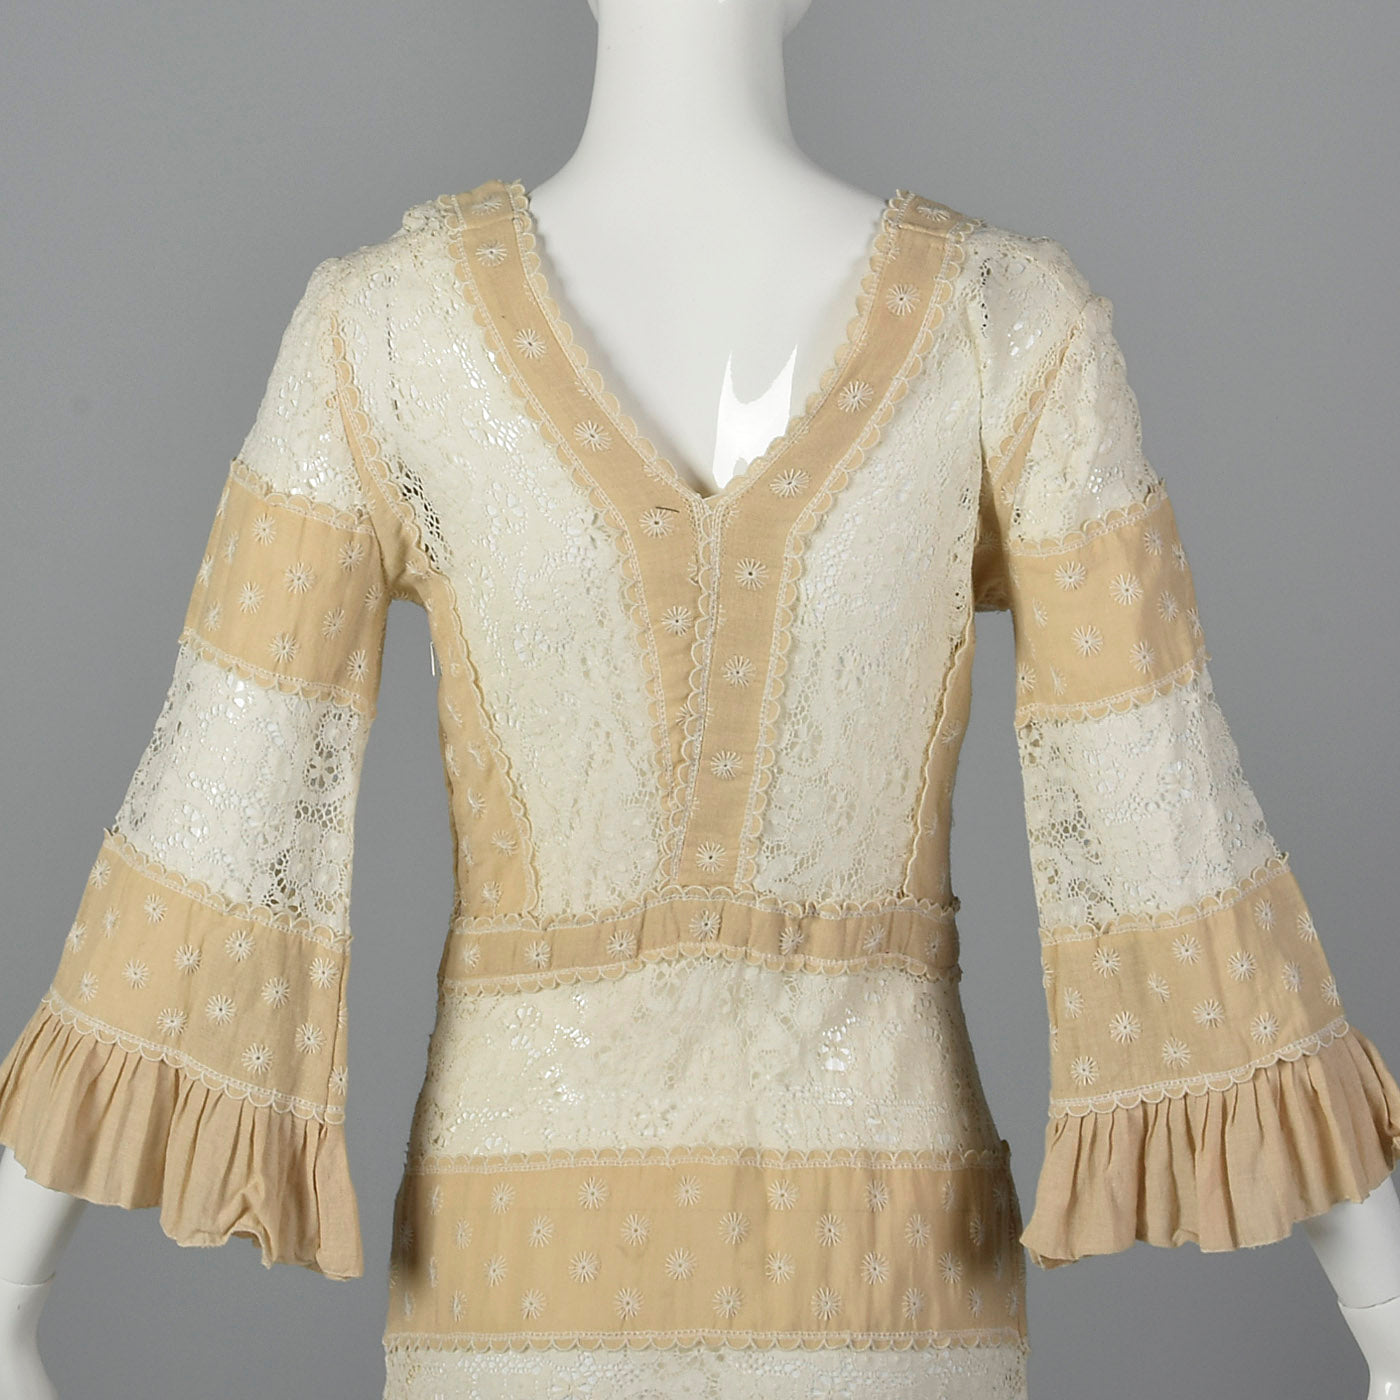 1970s Bohemian Dress with Sheer Lace Panels